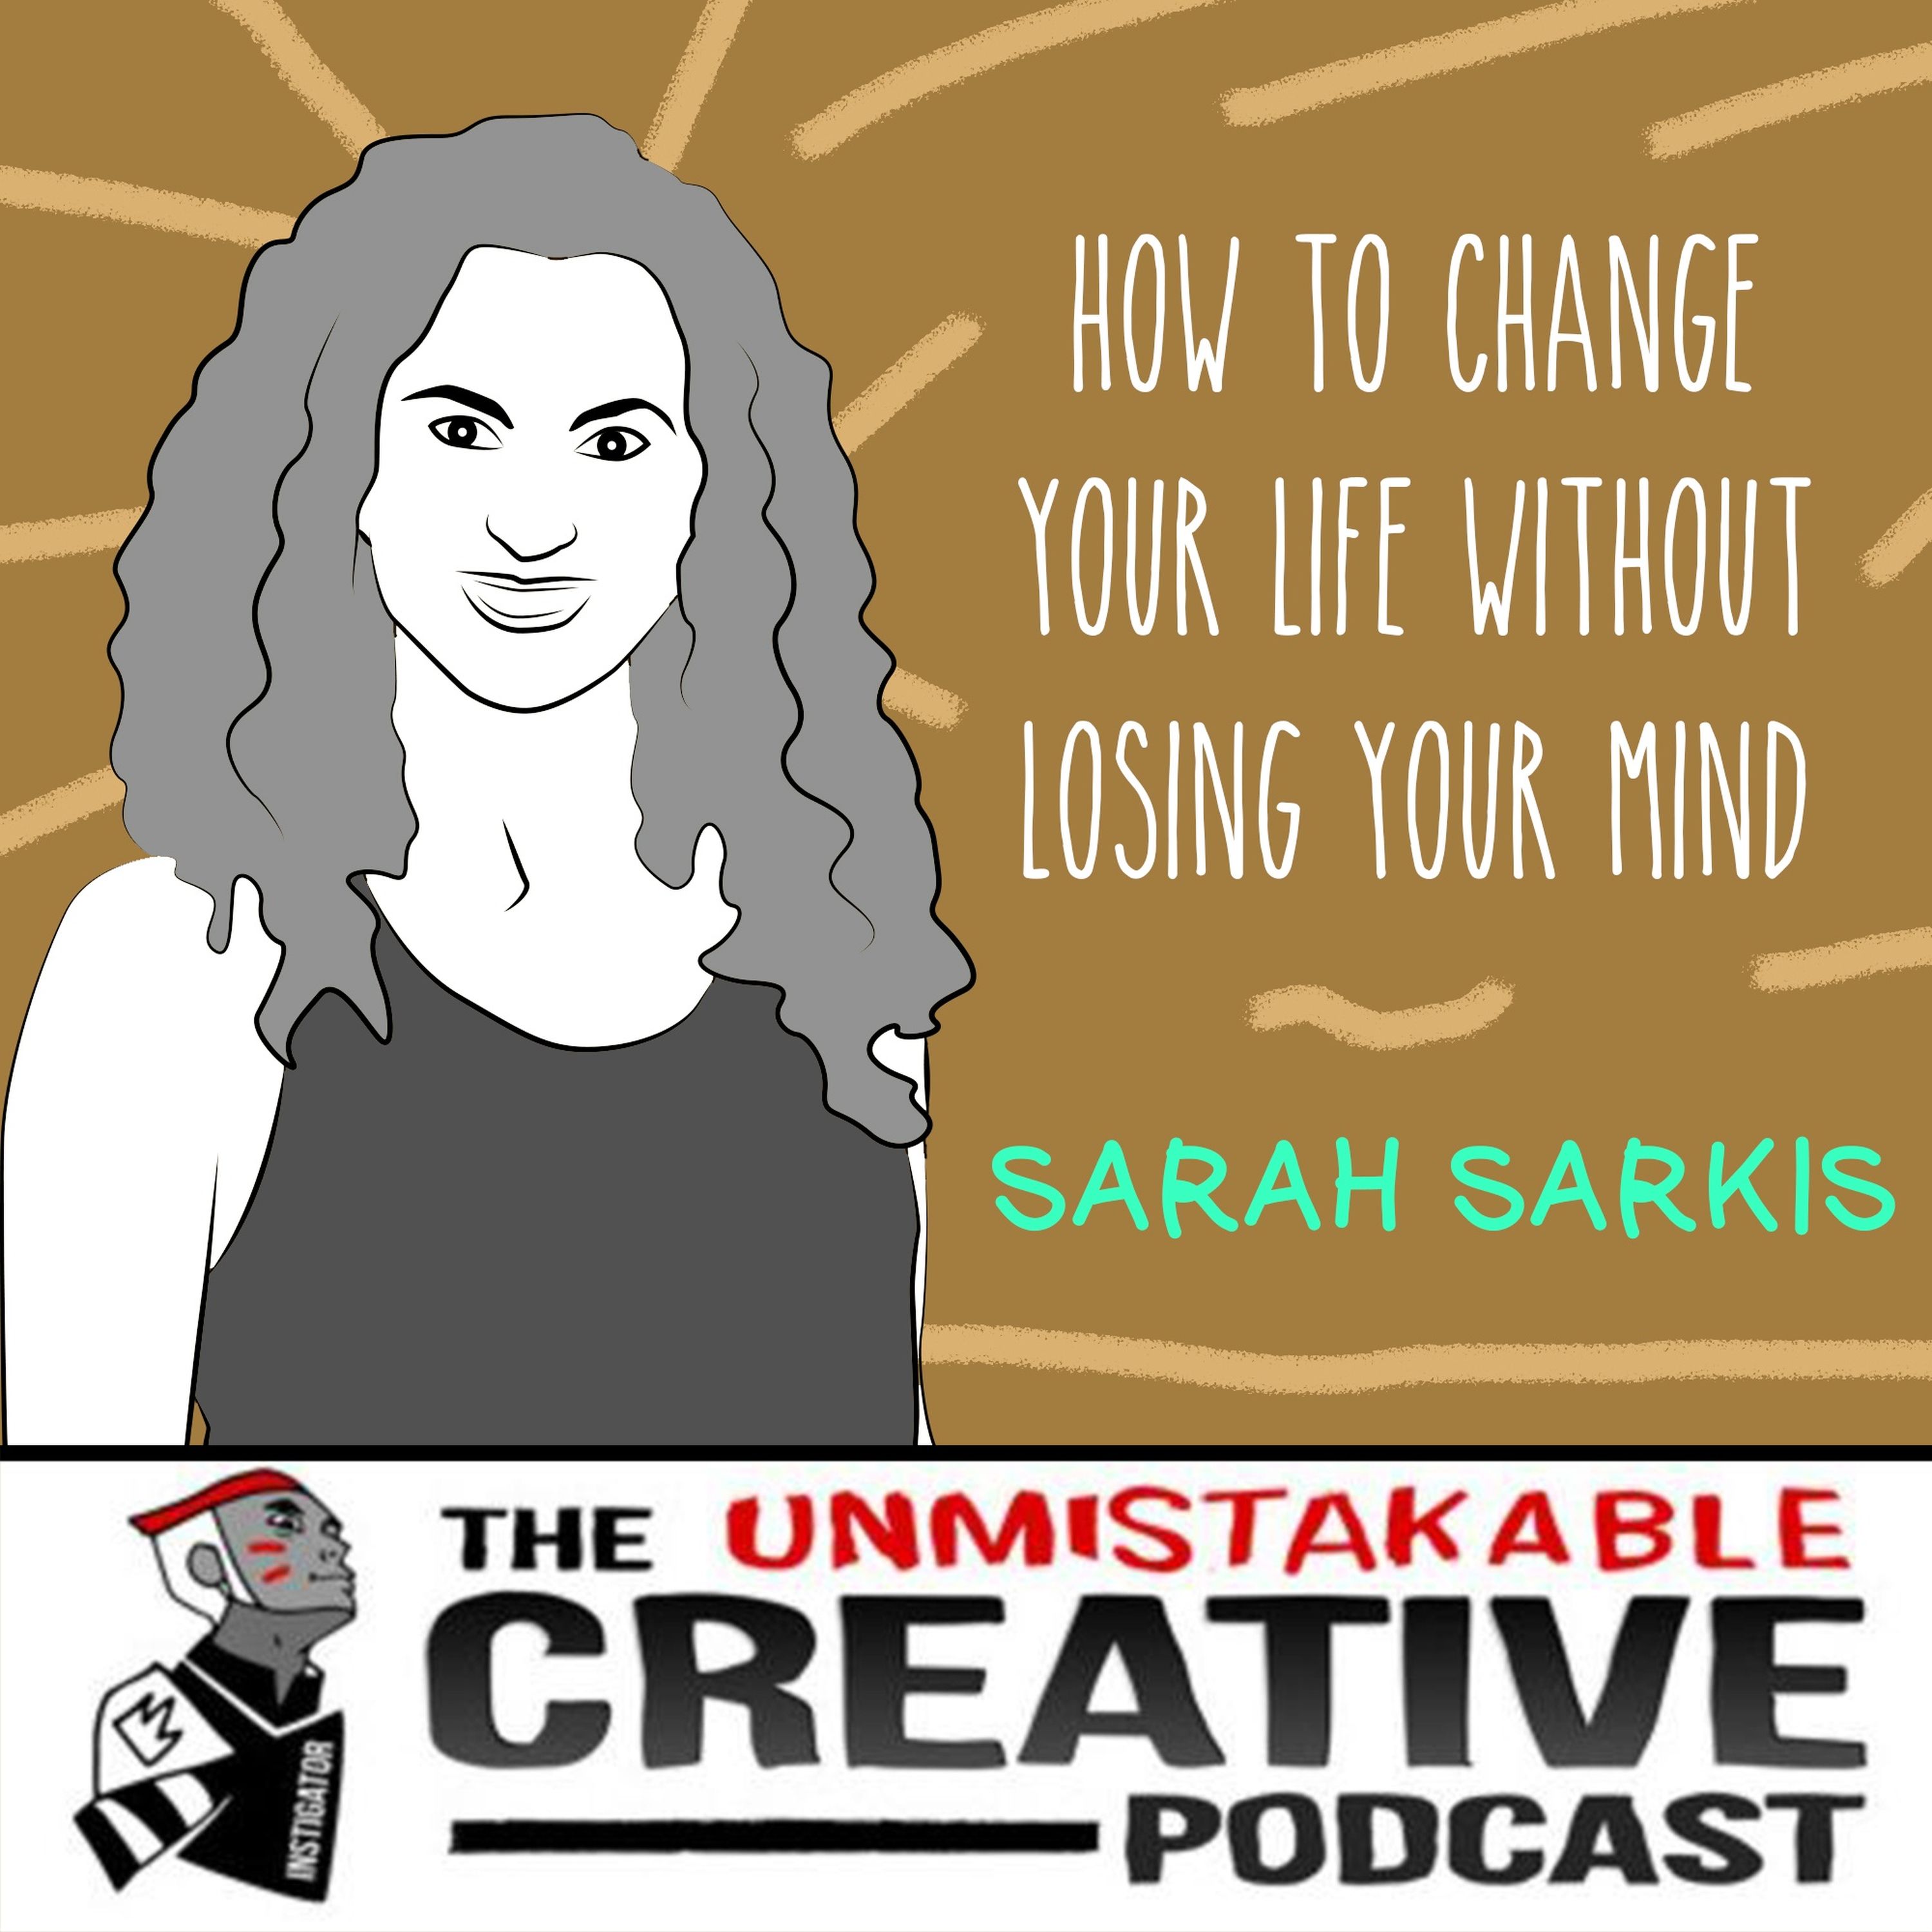 Sarah Sarkis: How to Change Your Life Without Losing Your Mind Image